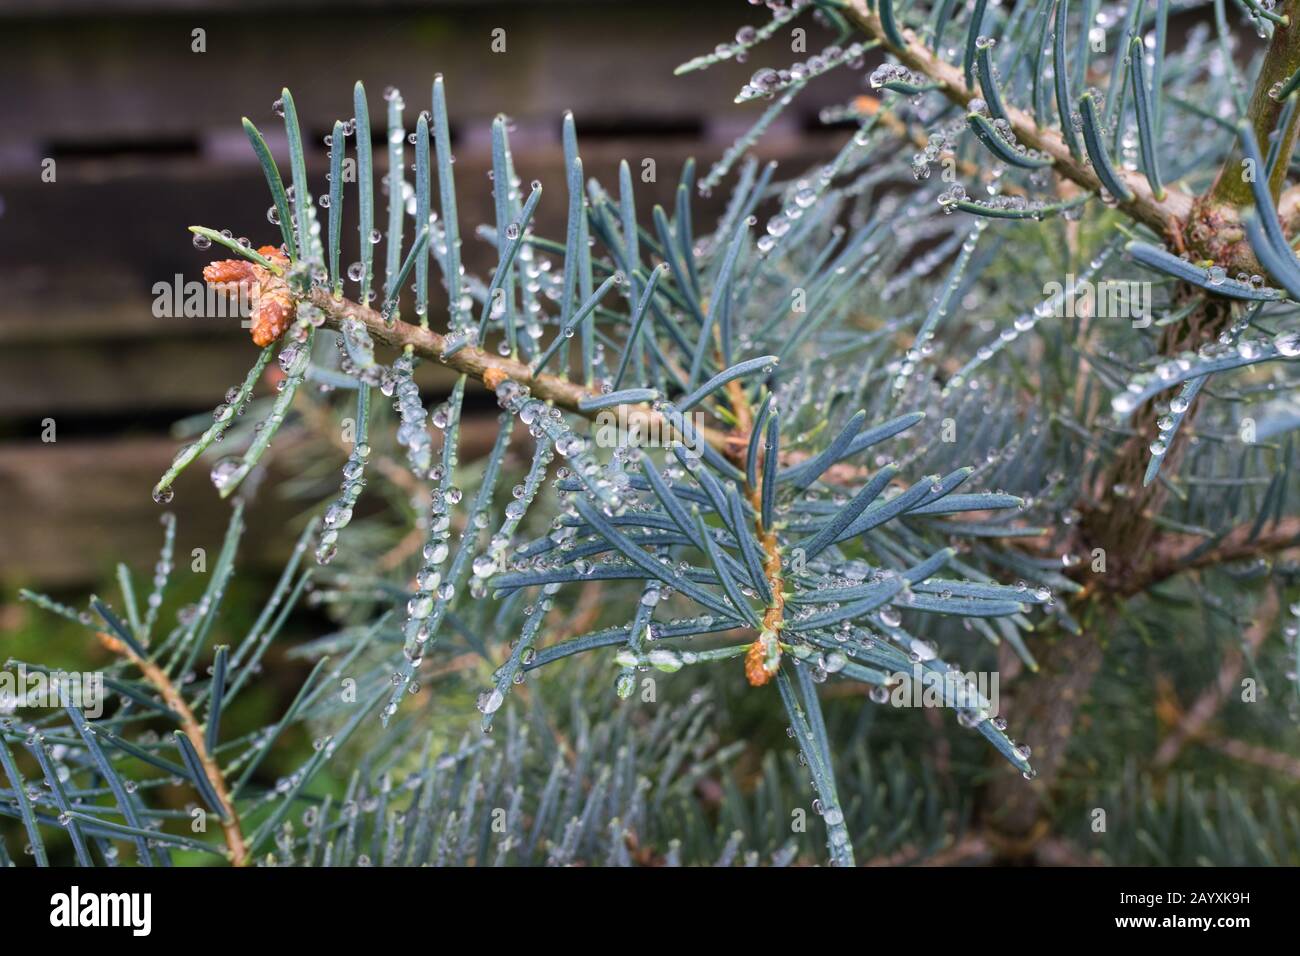 Water droplets on the long blue needles of Abies concolor (white fir) Stock Photo